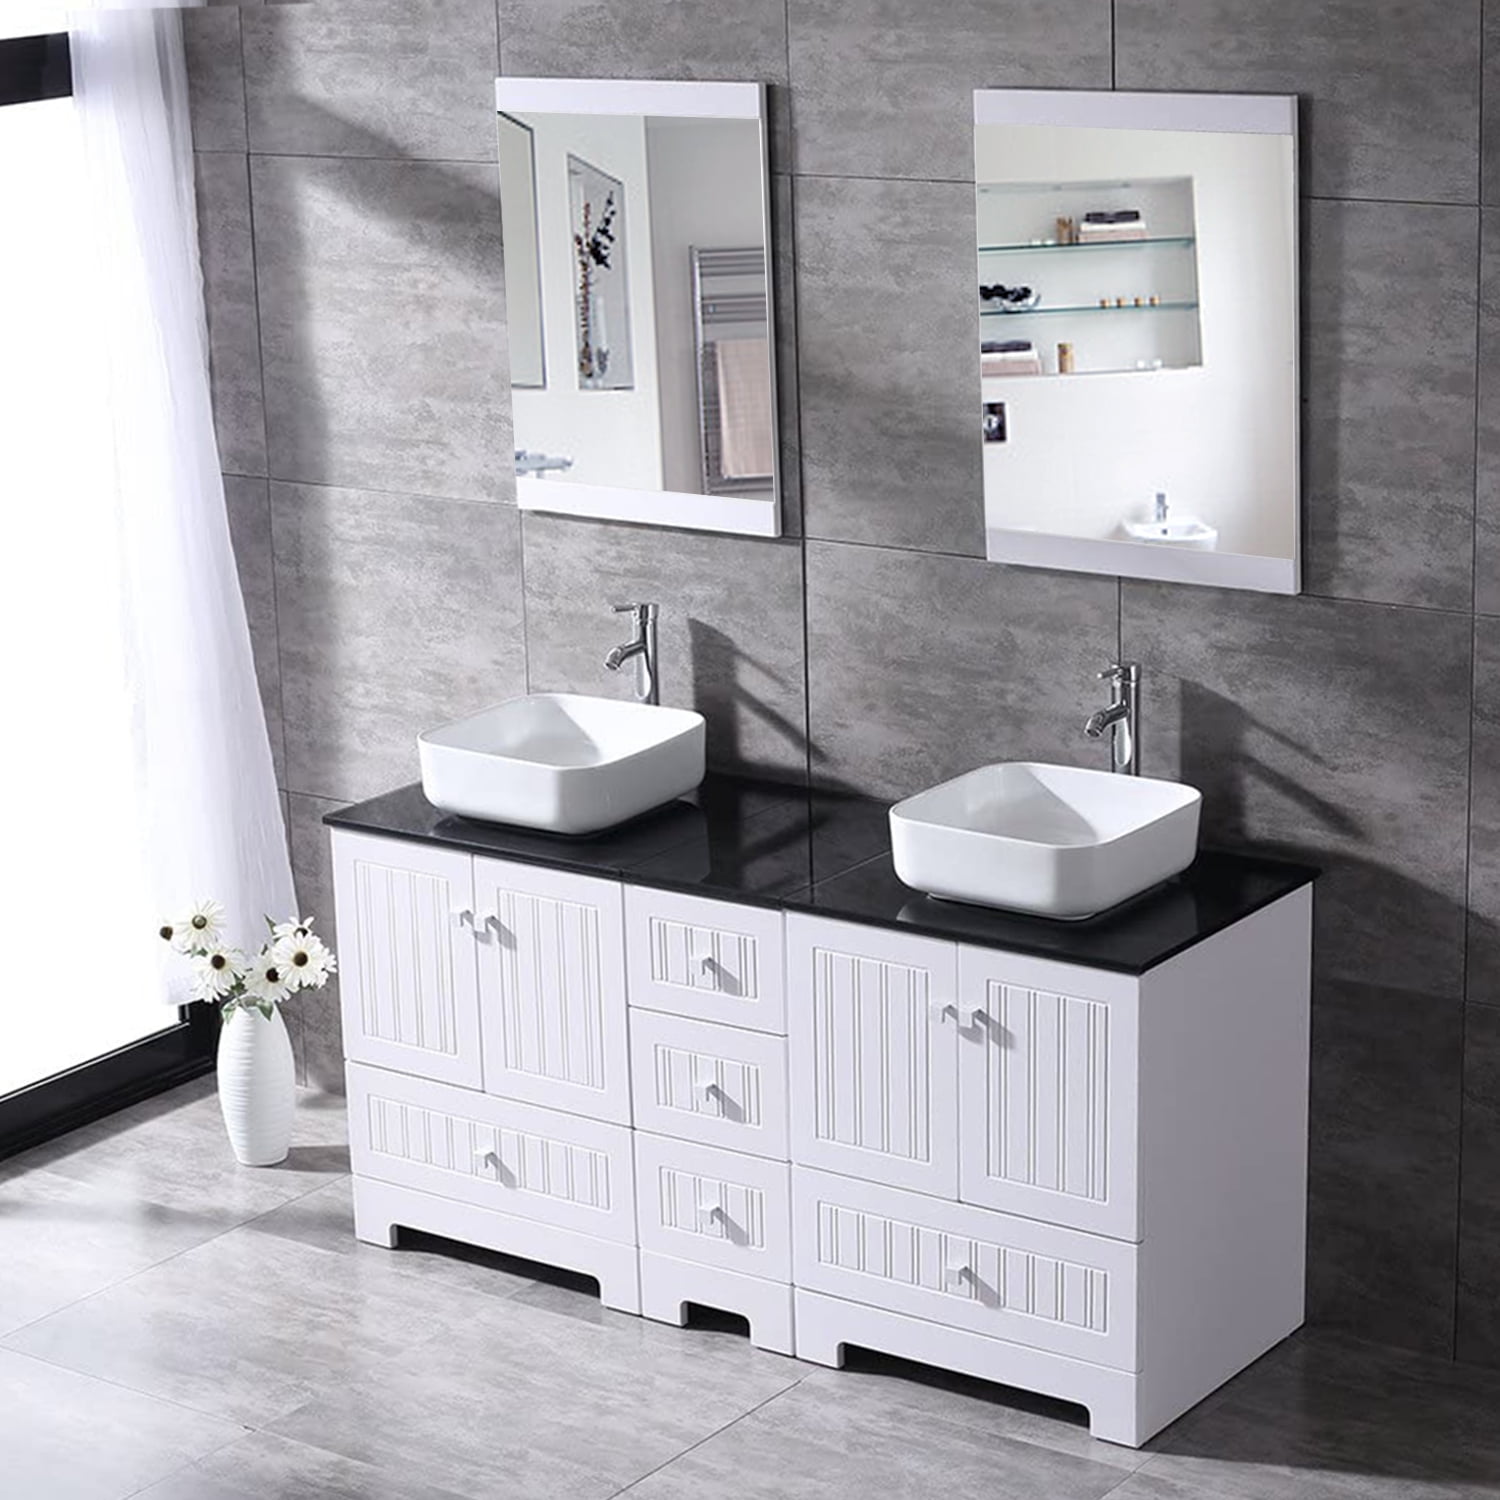 Wonline 60 White Double Bathroom Vanity Cabinet And Round Ceramic Sink W Mirror Combo Wash Basin With Faucet Walmart Com